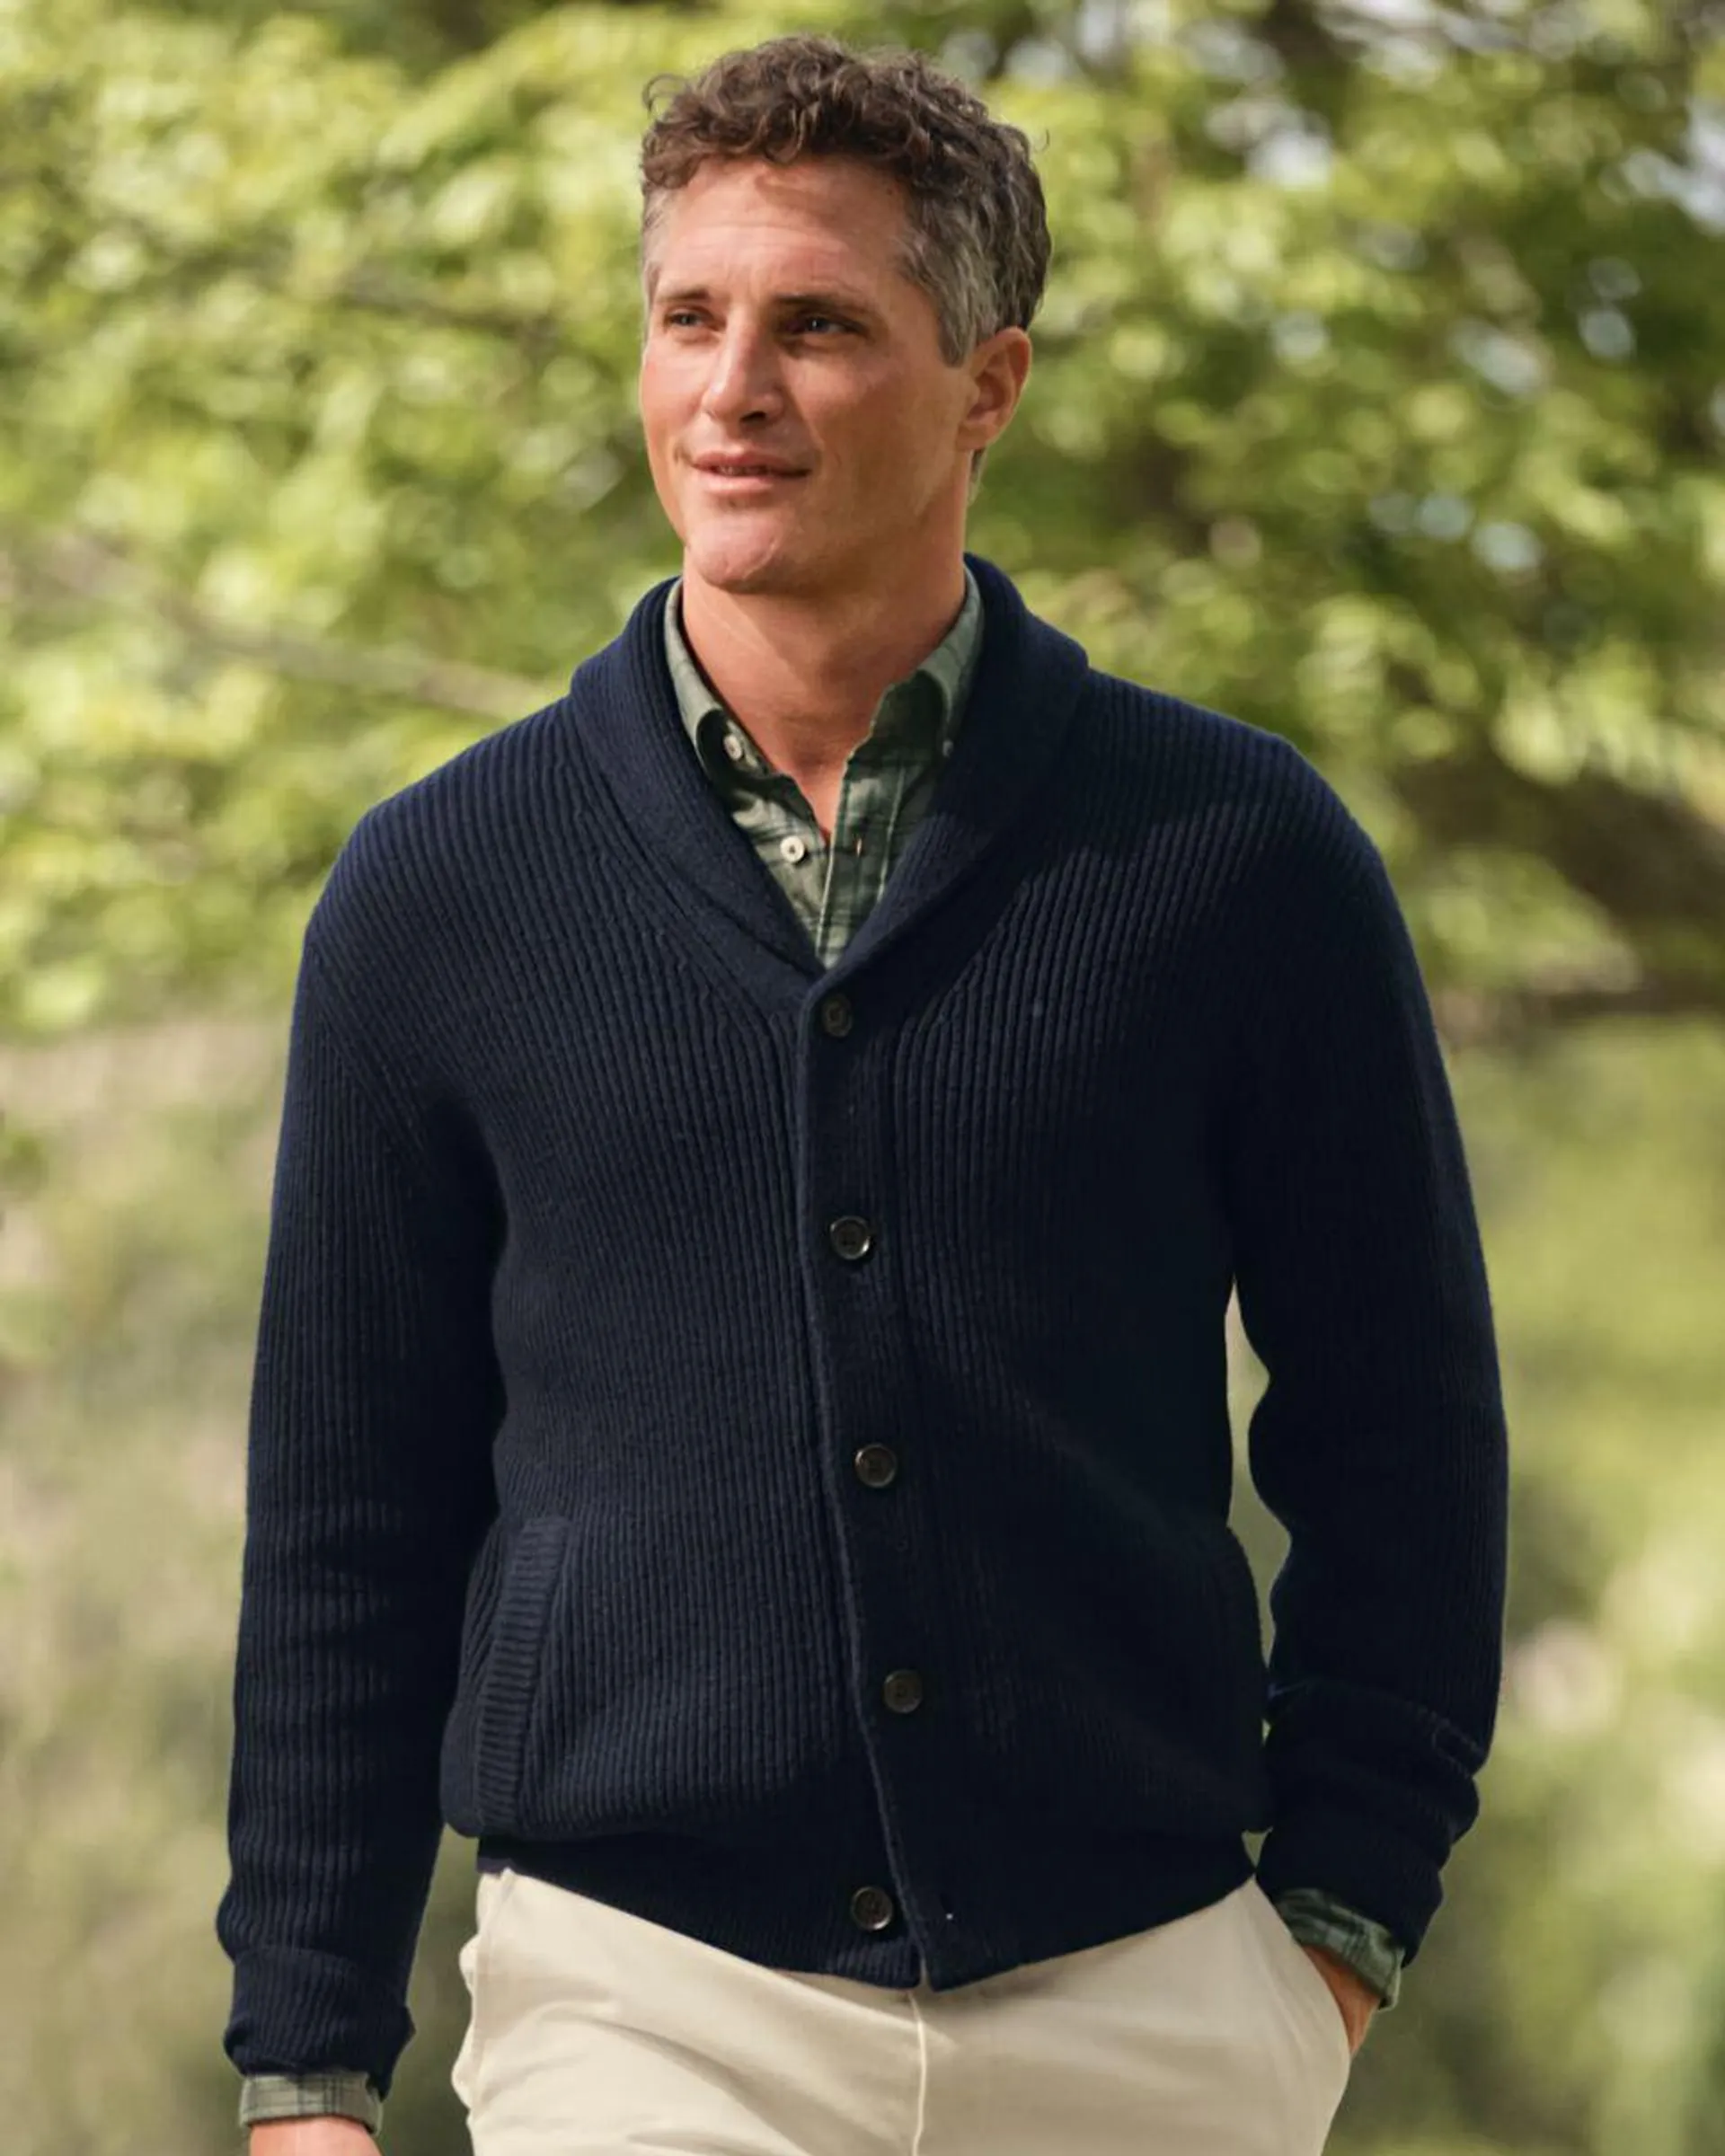 details about product: Merino Shawl Neck Chunky Cardigan - Navy